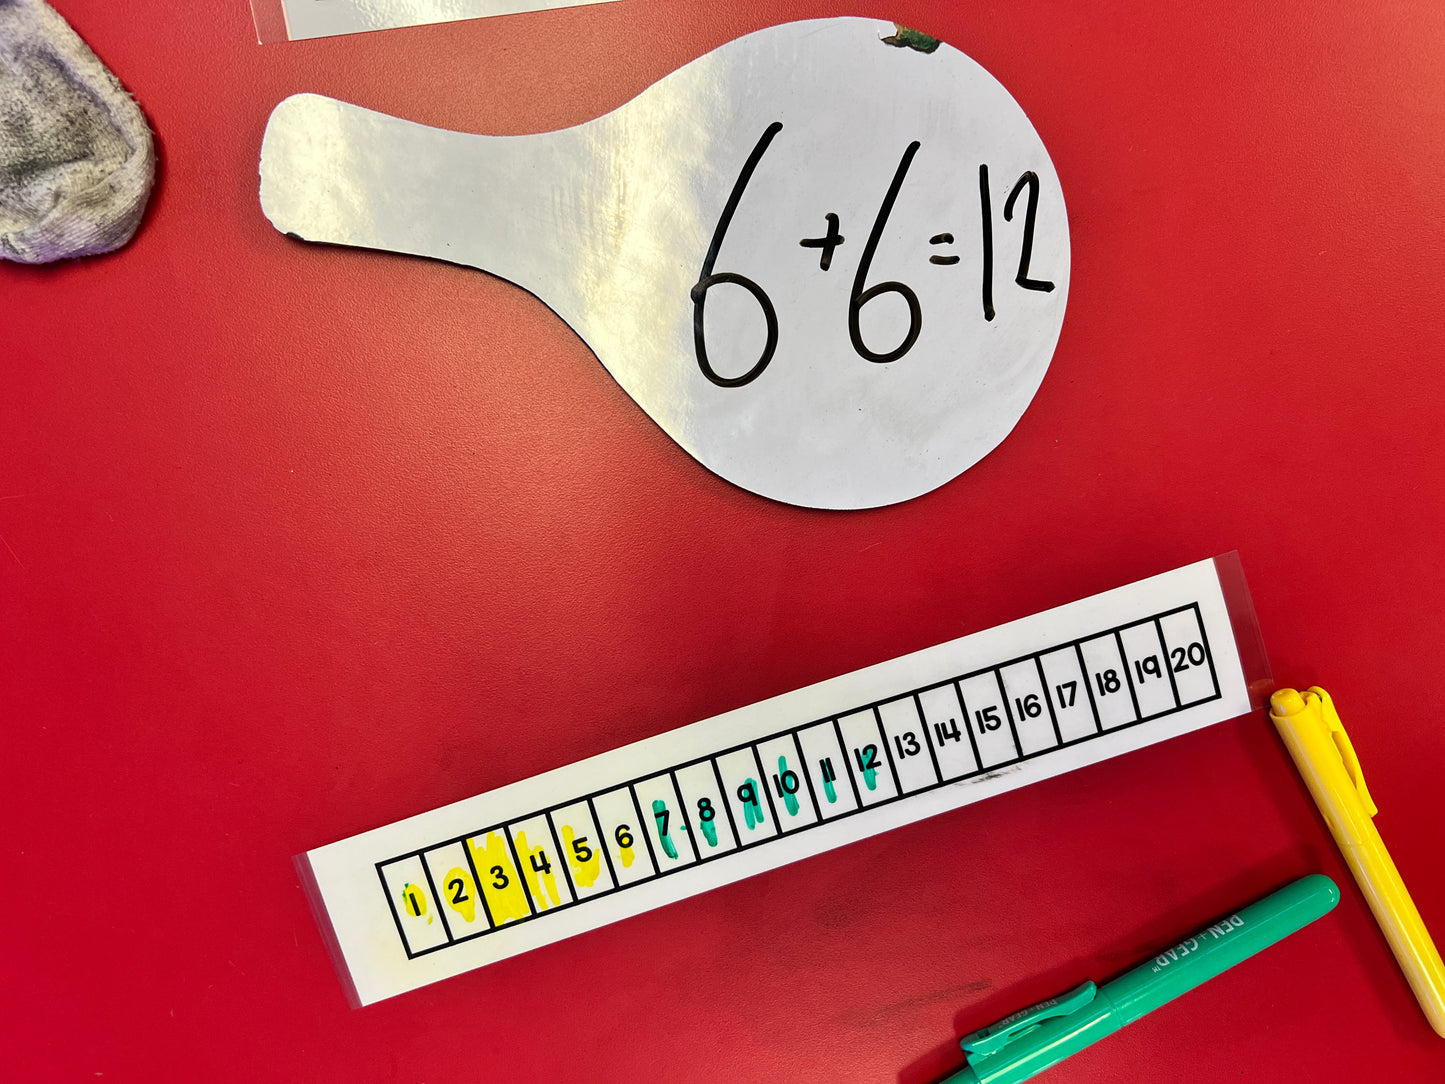 Small Group Math Toolkit